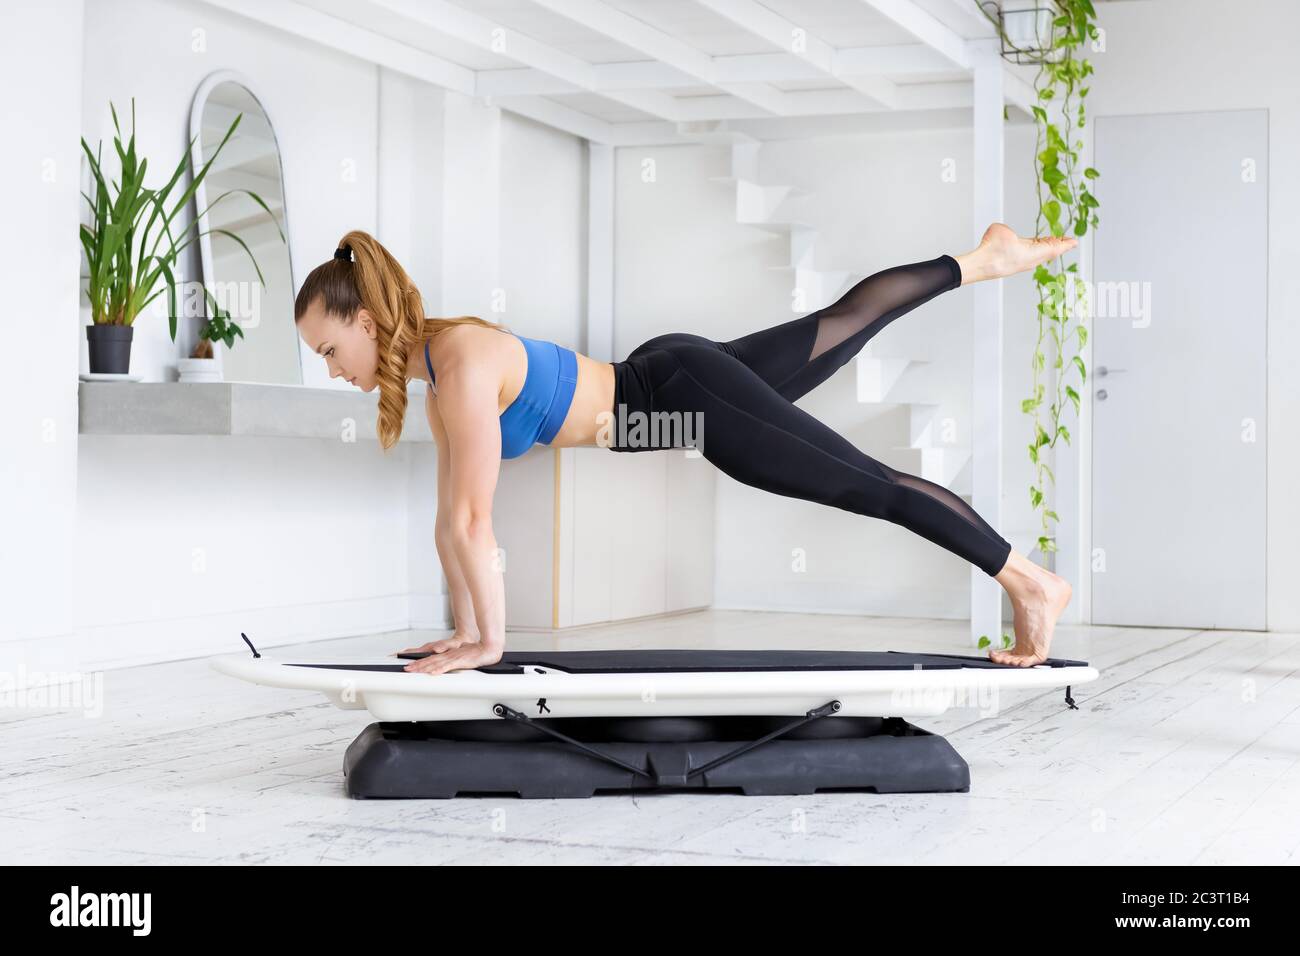 Athletic fit young woman doing a fit surf plank kick back yoga pose on a board in a side view in a high key gym with fresh green plants in a health an Stock Photo